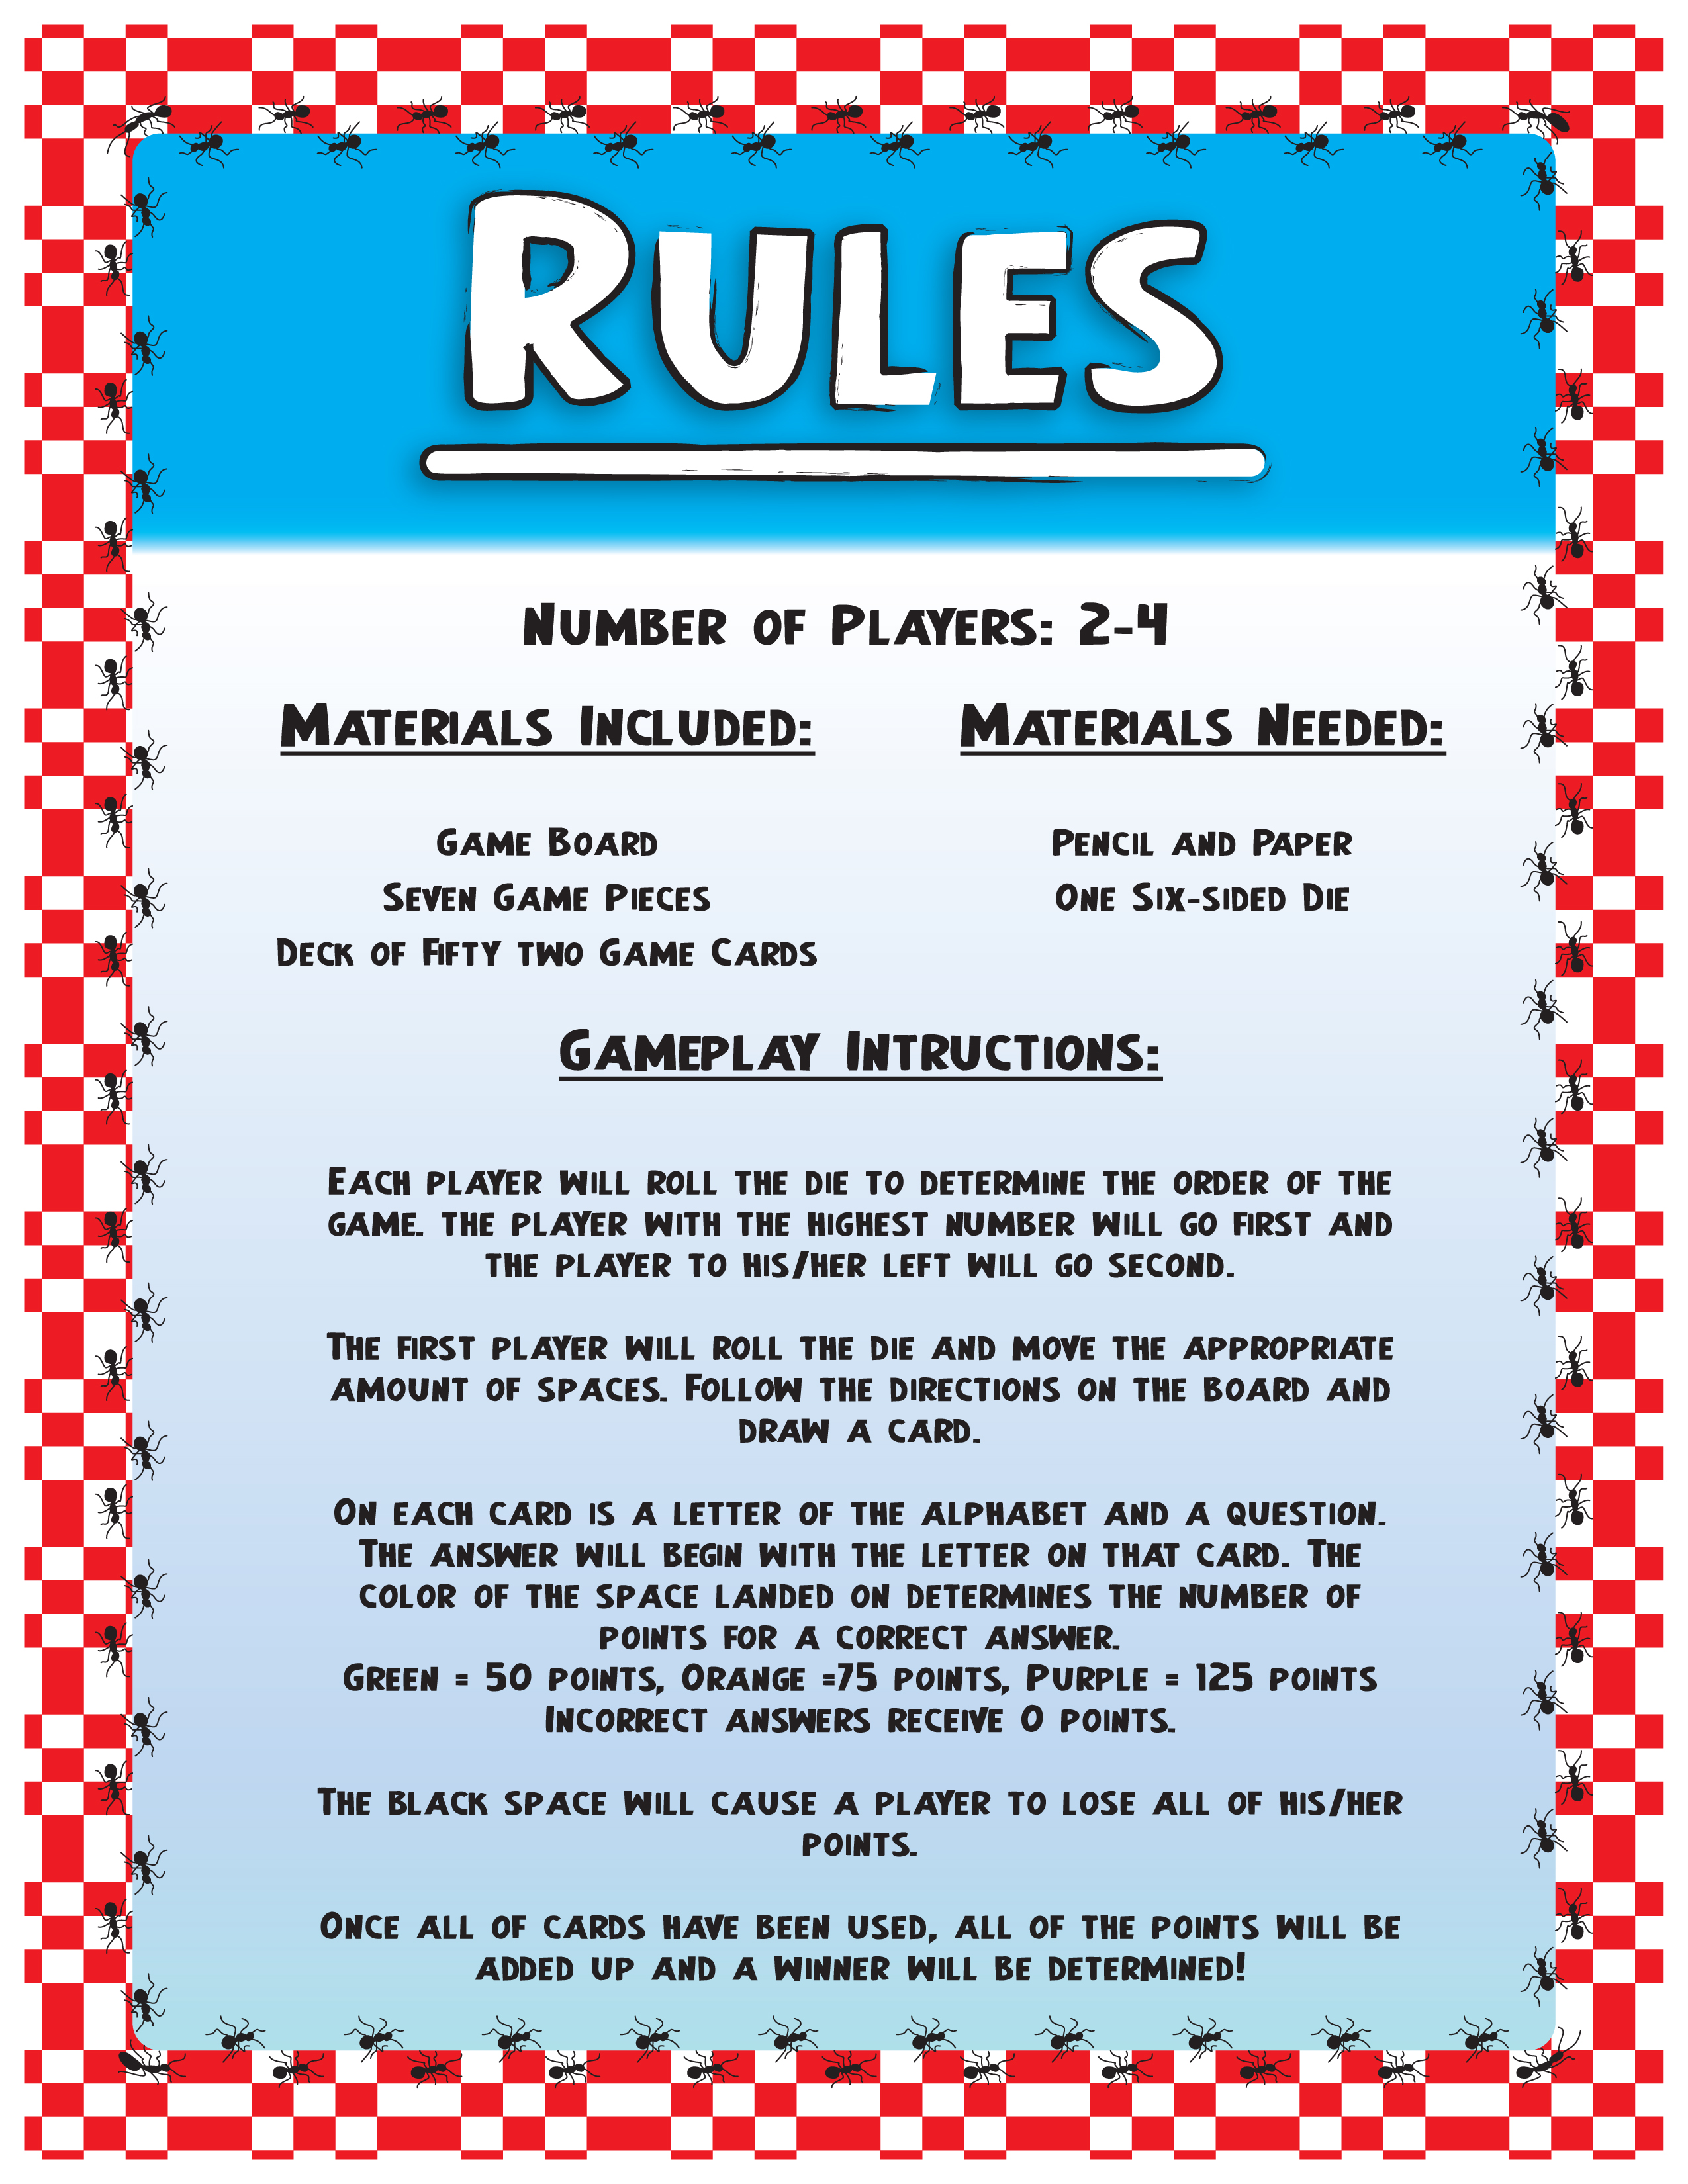 Your game your rules. Board game Rules. The Rules of the game. Board game instruction. Board game Rules in English.